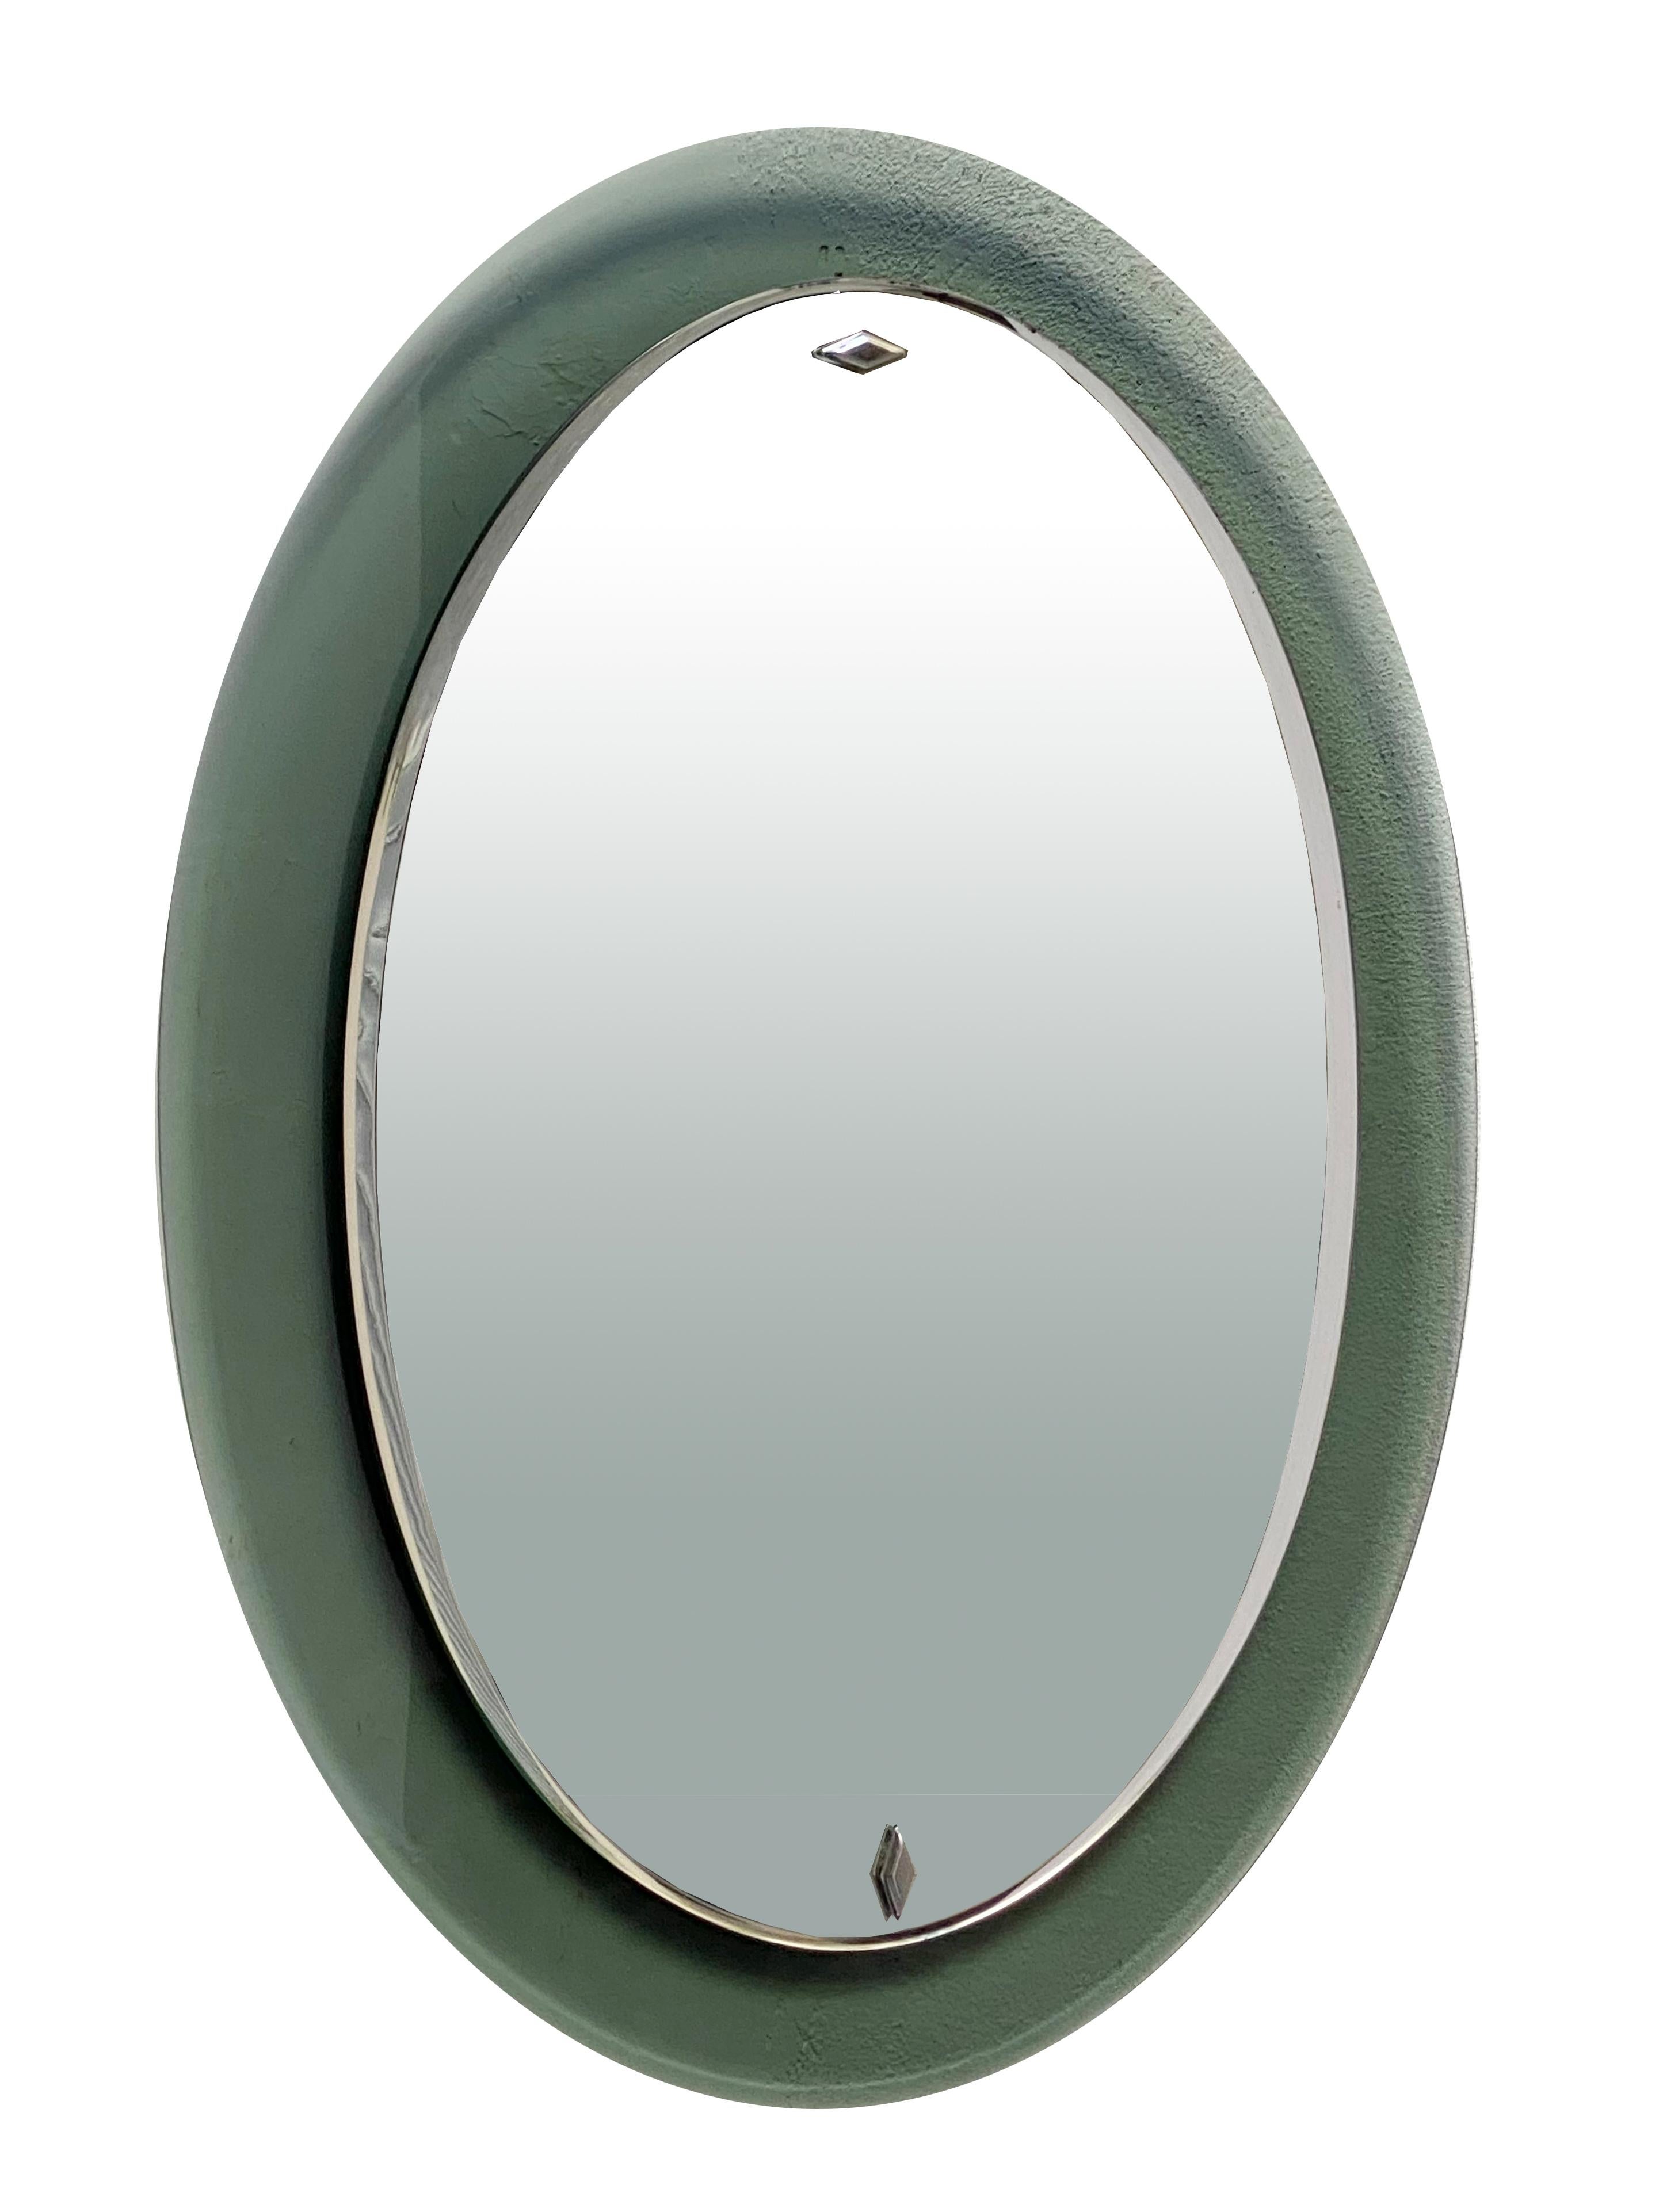 1960s oval mirror produced by Cristal Art in Italy. 
Light green frame, curved ground glass.